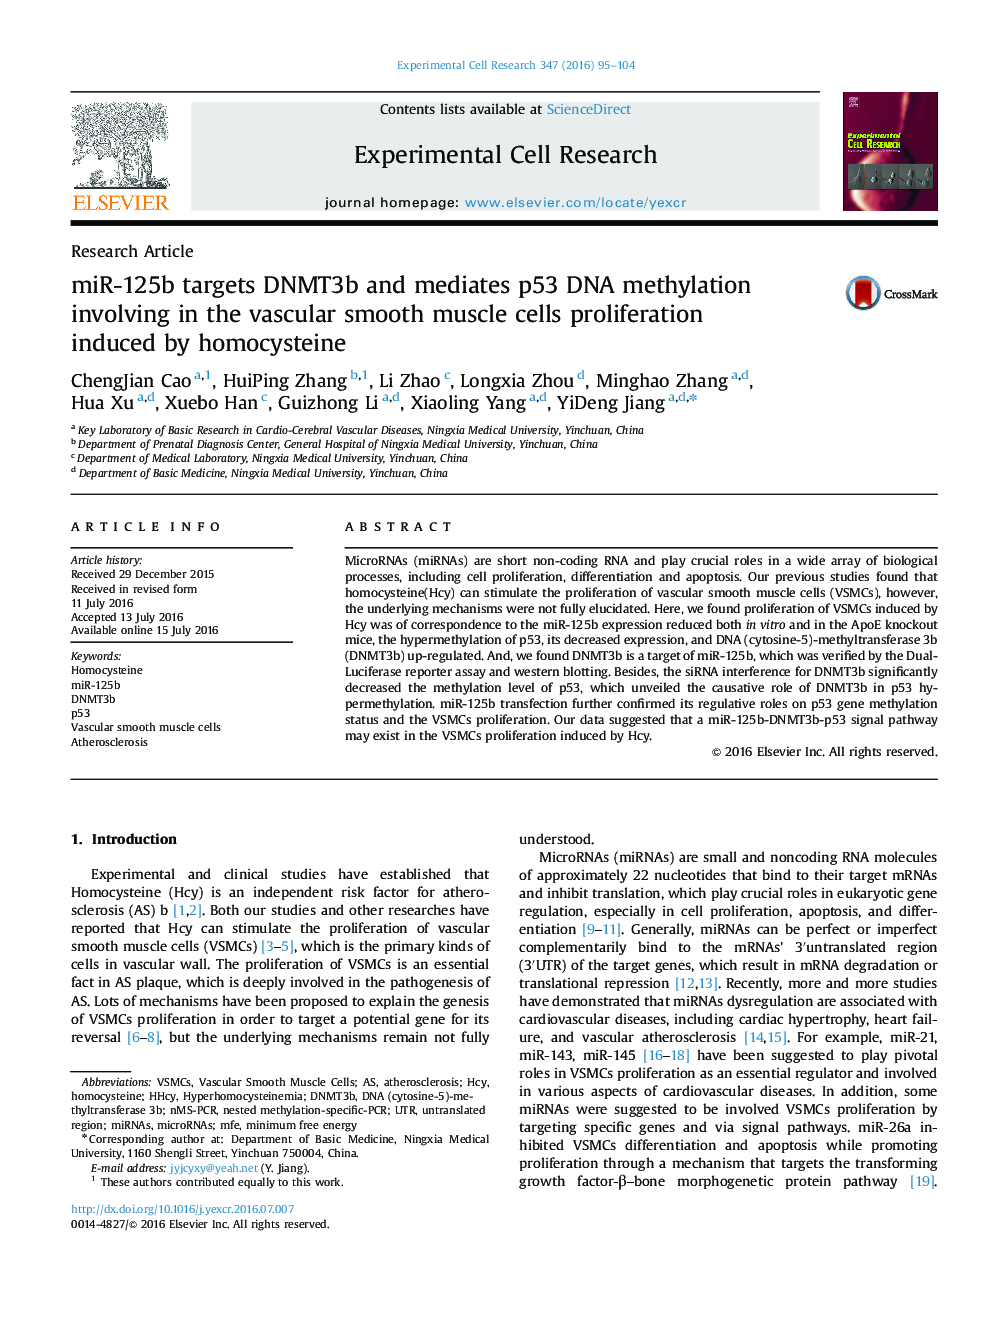 miR-125b targets DNMT3b and mediates p53 DNA methylation involving in the vascular smooth muscle cells proliferation induced by homocysteine